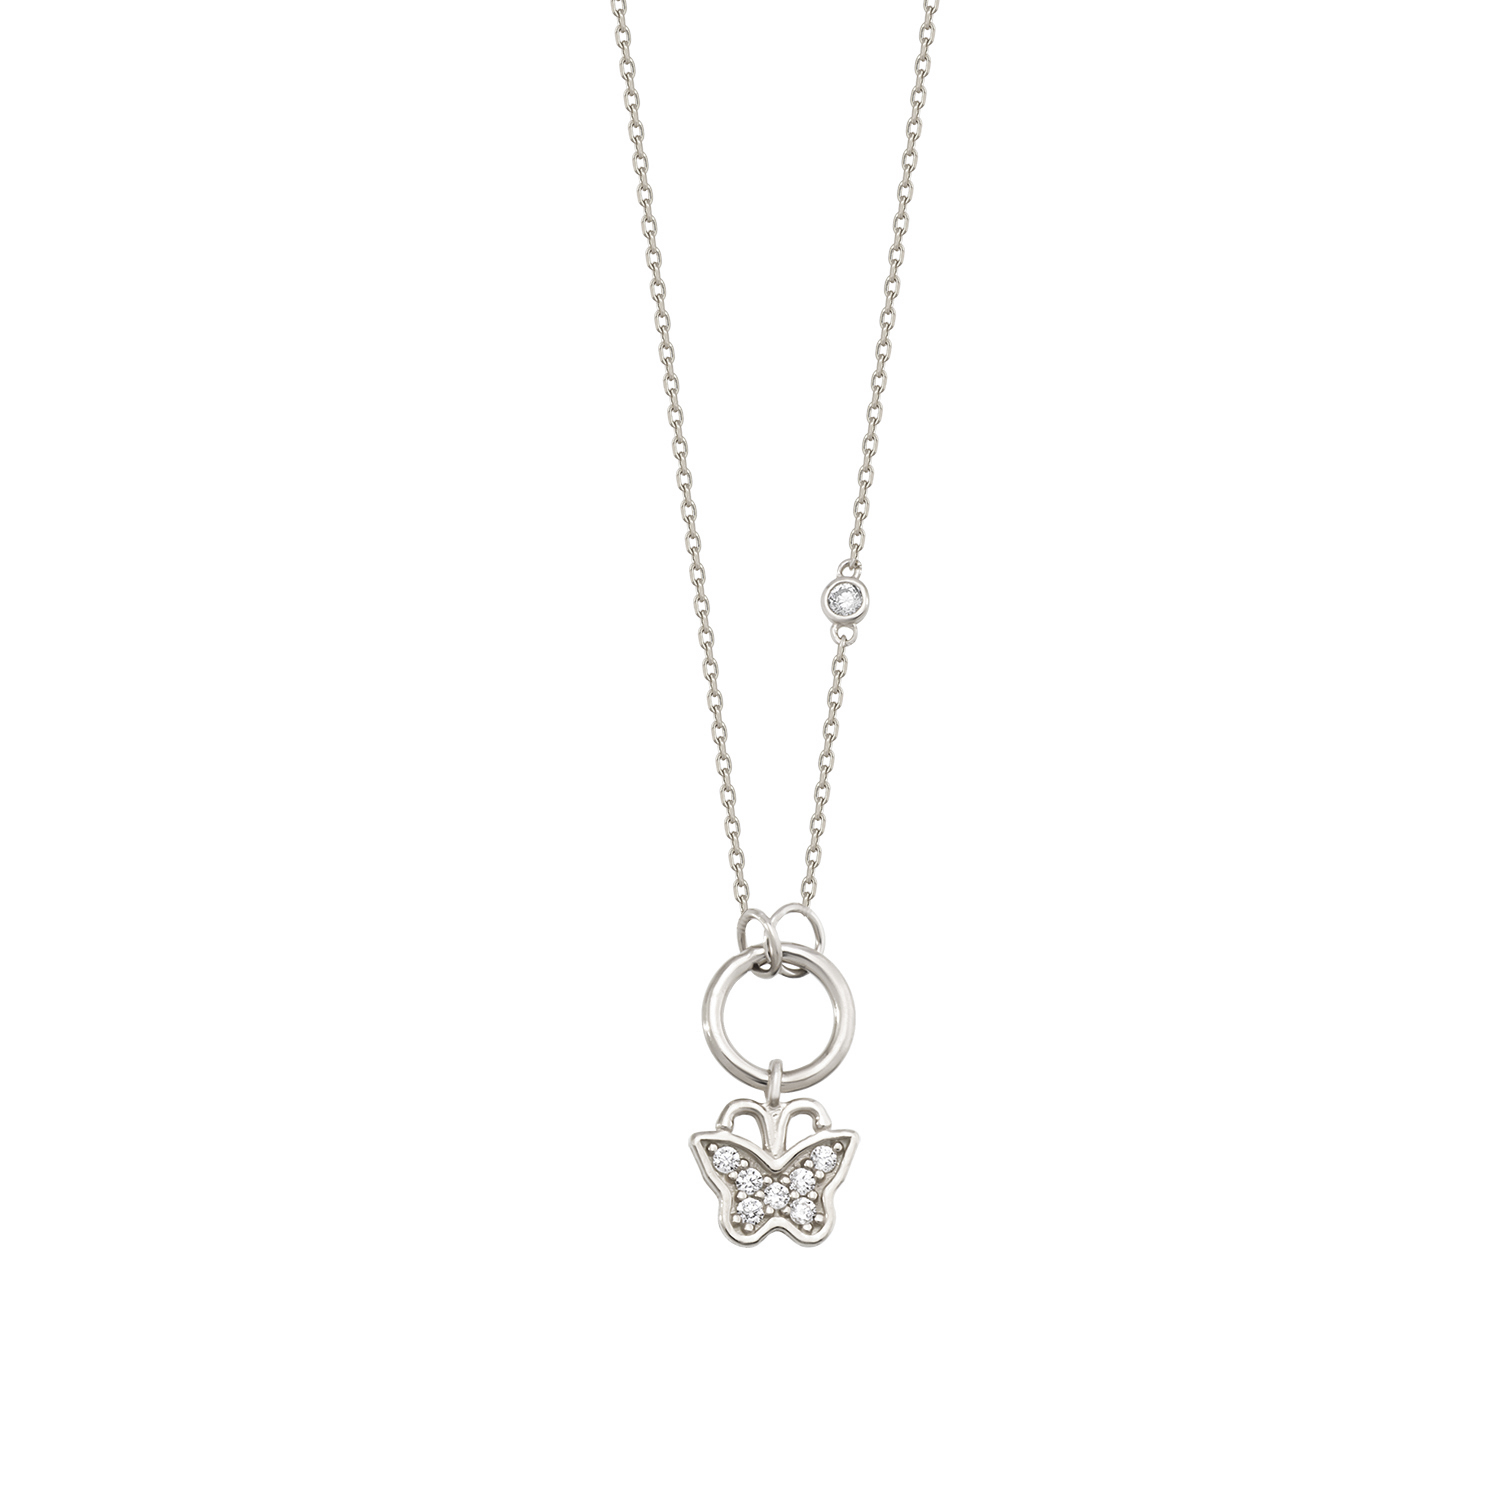 Silver Necklace Butterfly Design Zircon Stone 925 Sterling 